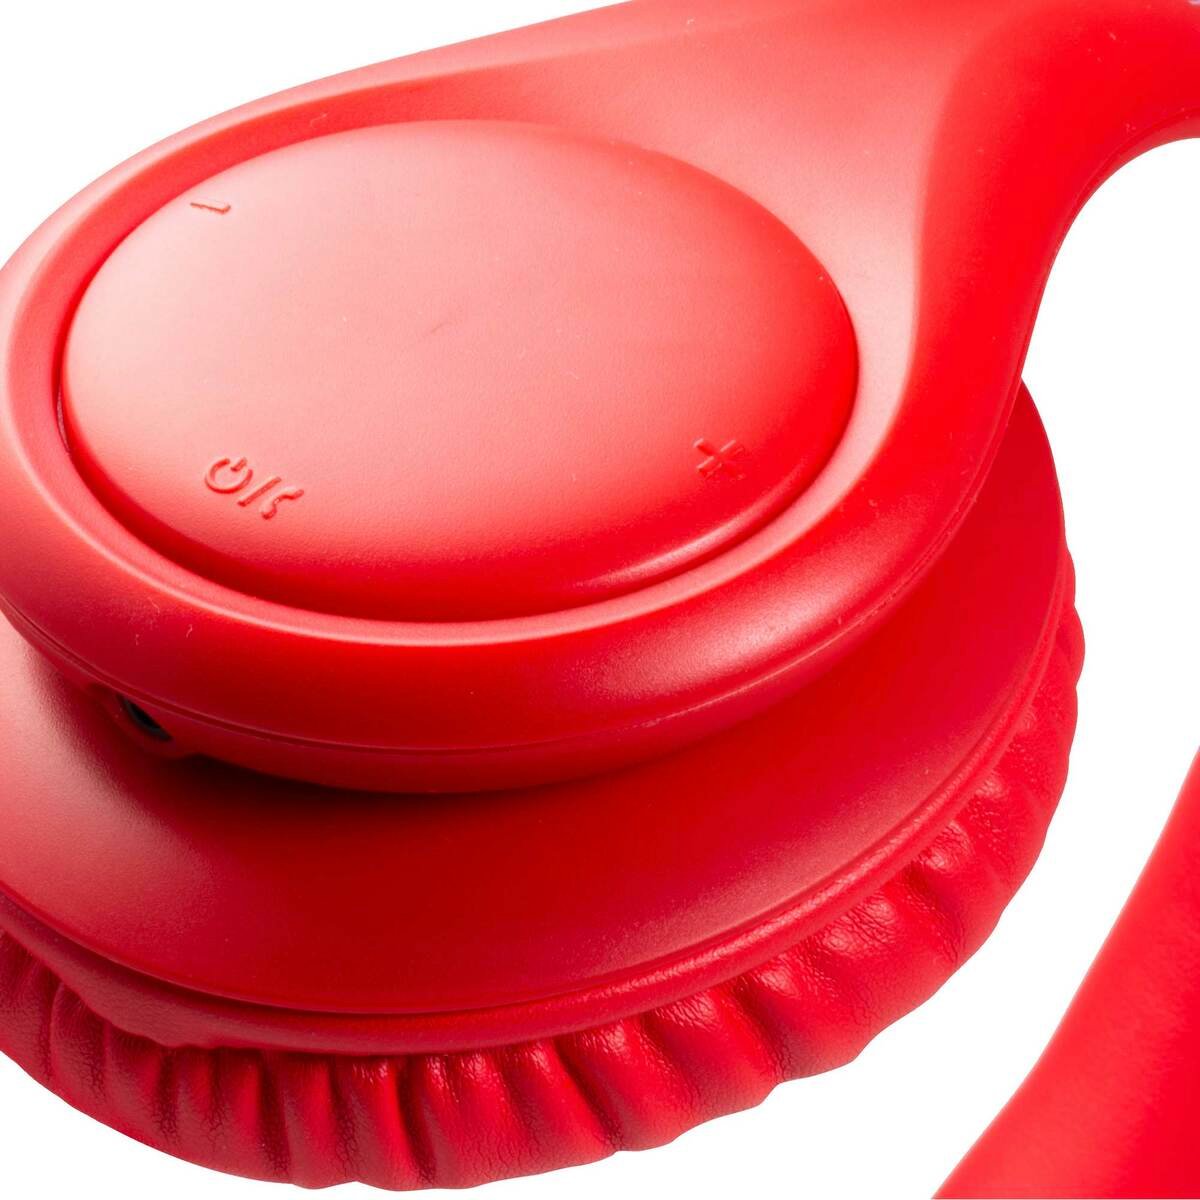 Promate Over Ear Wireless Headset Plush Red